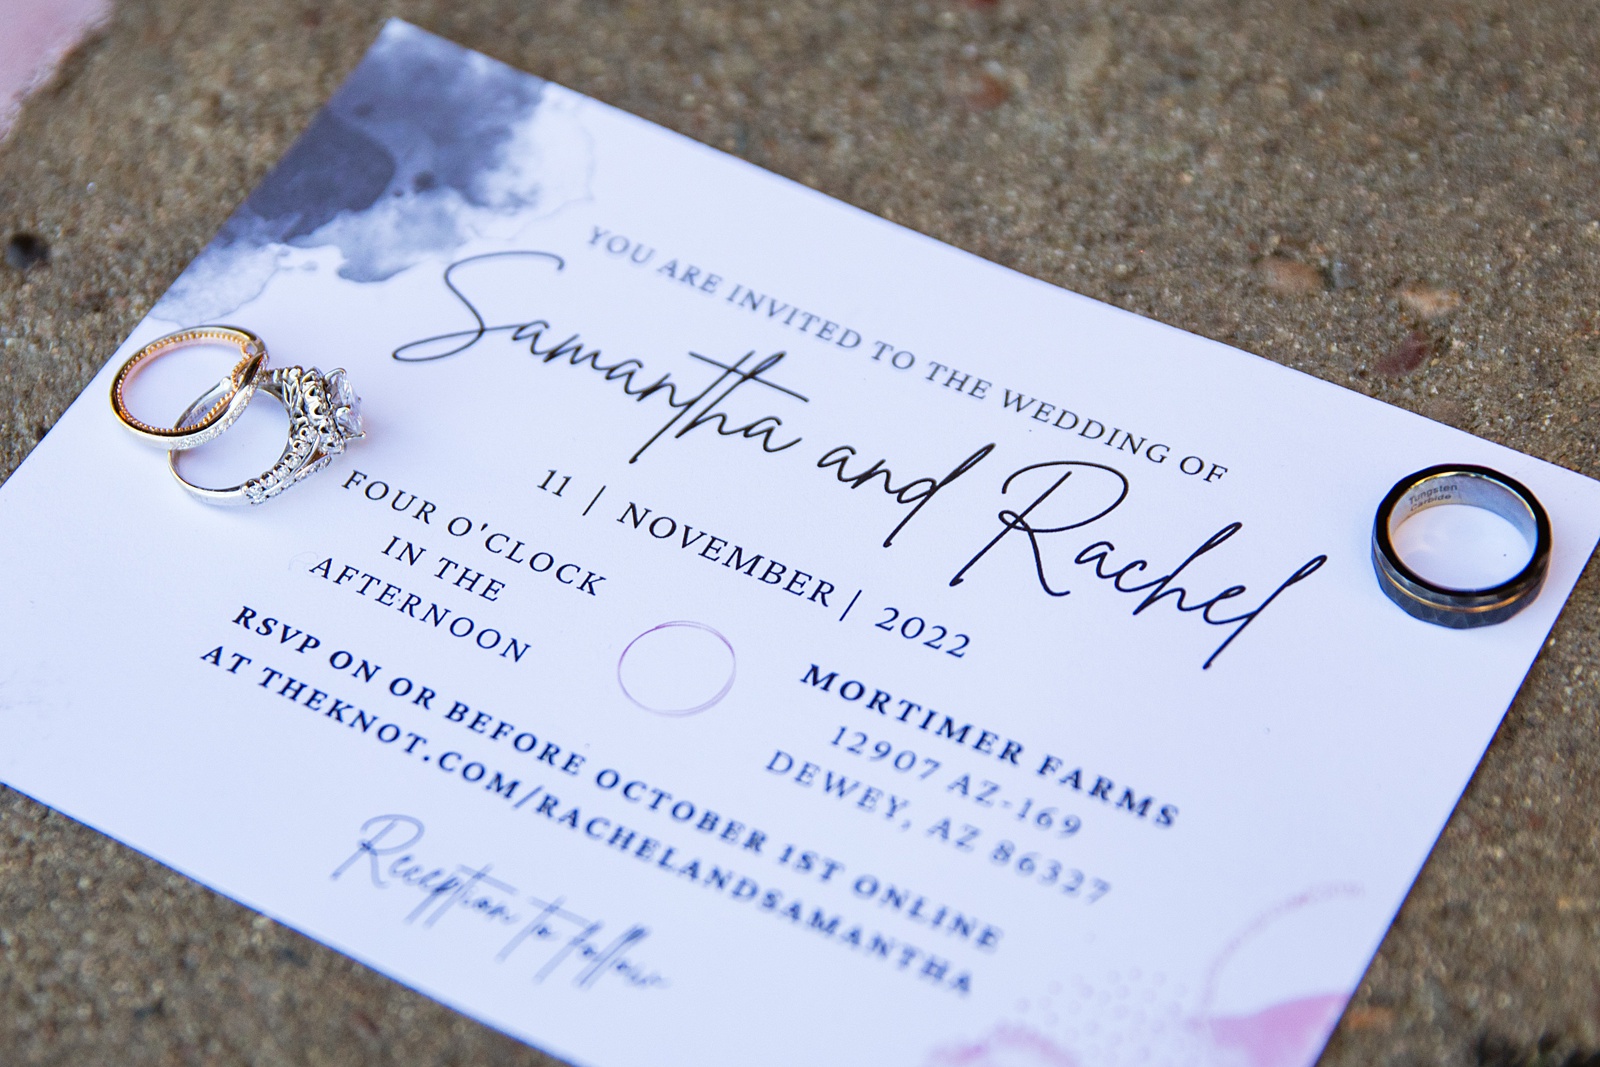 Brides's wedding day details of watercolor wedding invitation and wedding rings by PMA Photography.